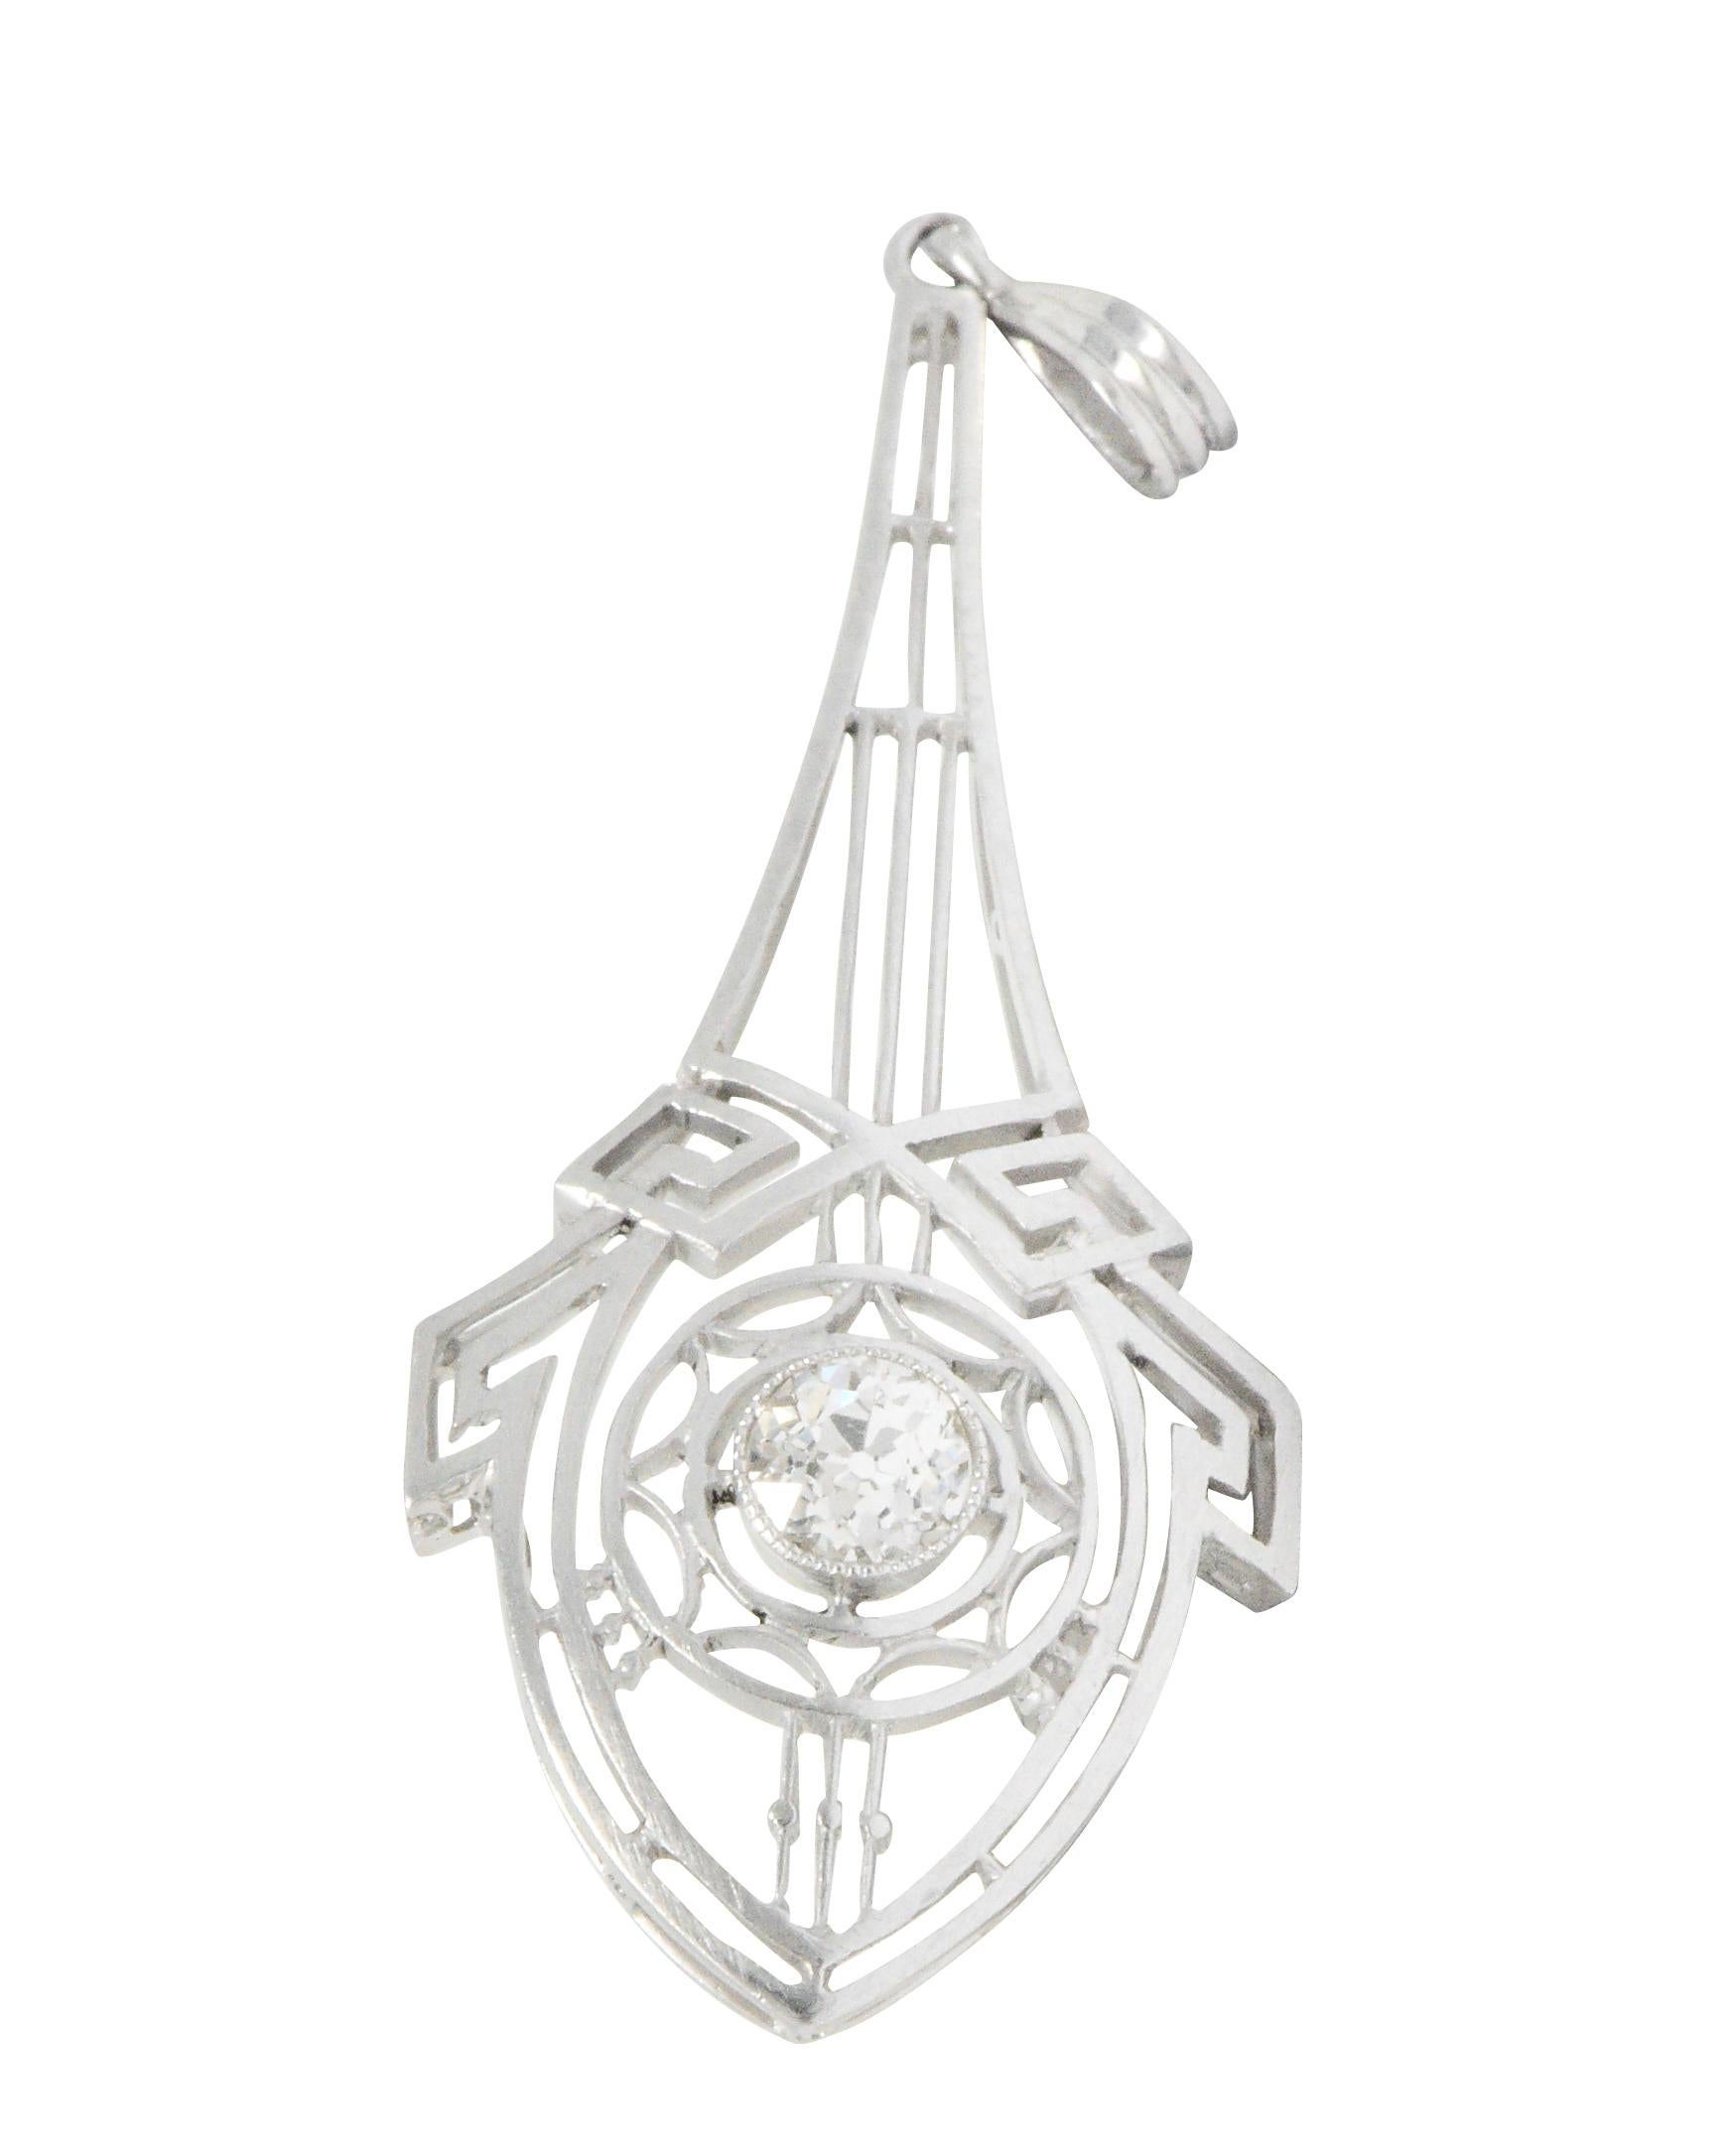 Pendant is a pierced geometric design featuring Greek key motif and scallop accents

Centering a bezel set old European cut diamond weighing approximately 0.25 carat, K color with VS clarity

Completed by a deeply ridged bale

Tested as